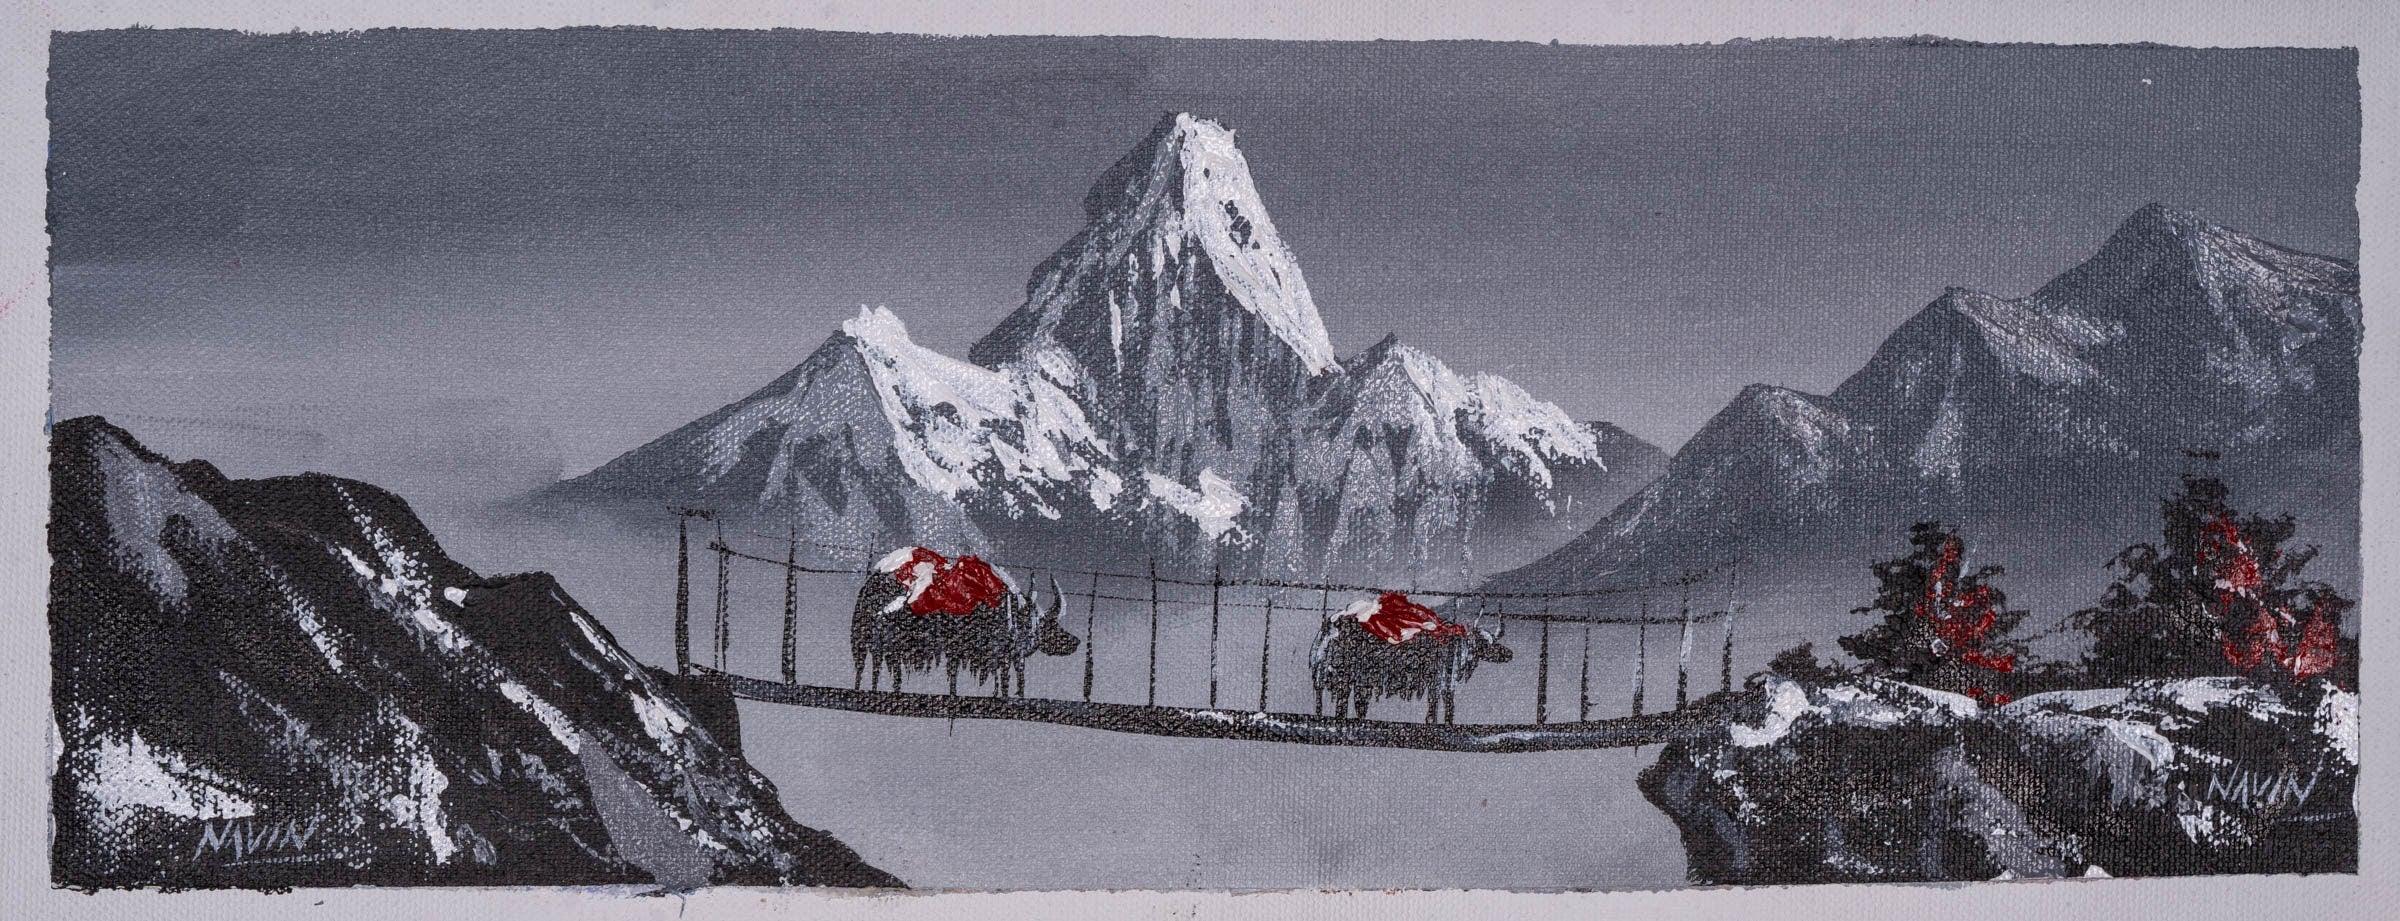 Everest with Ama Dablam - Oil Painting - Himalayas Shop